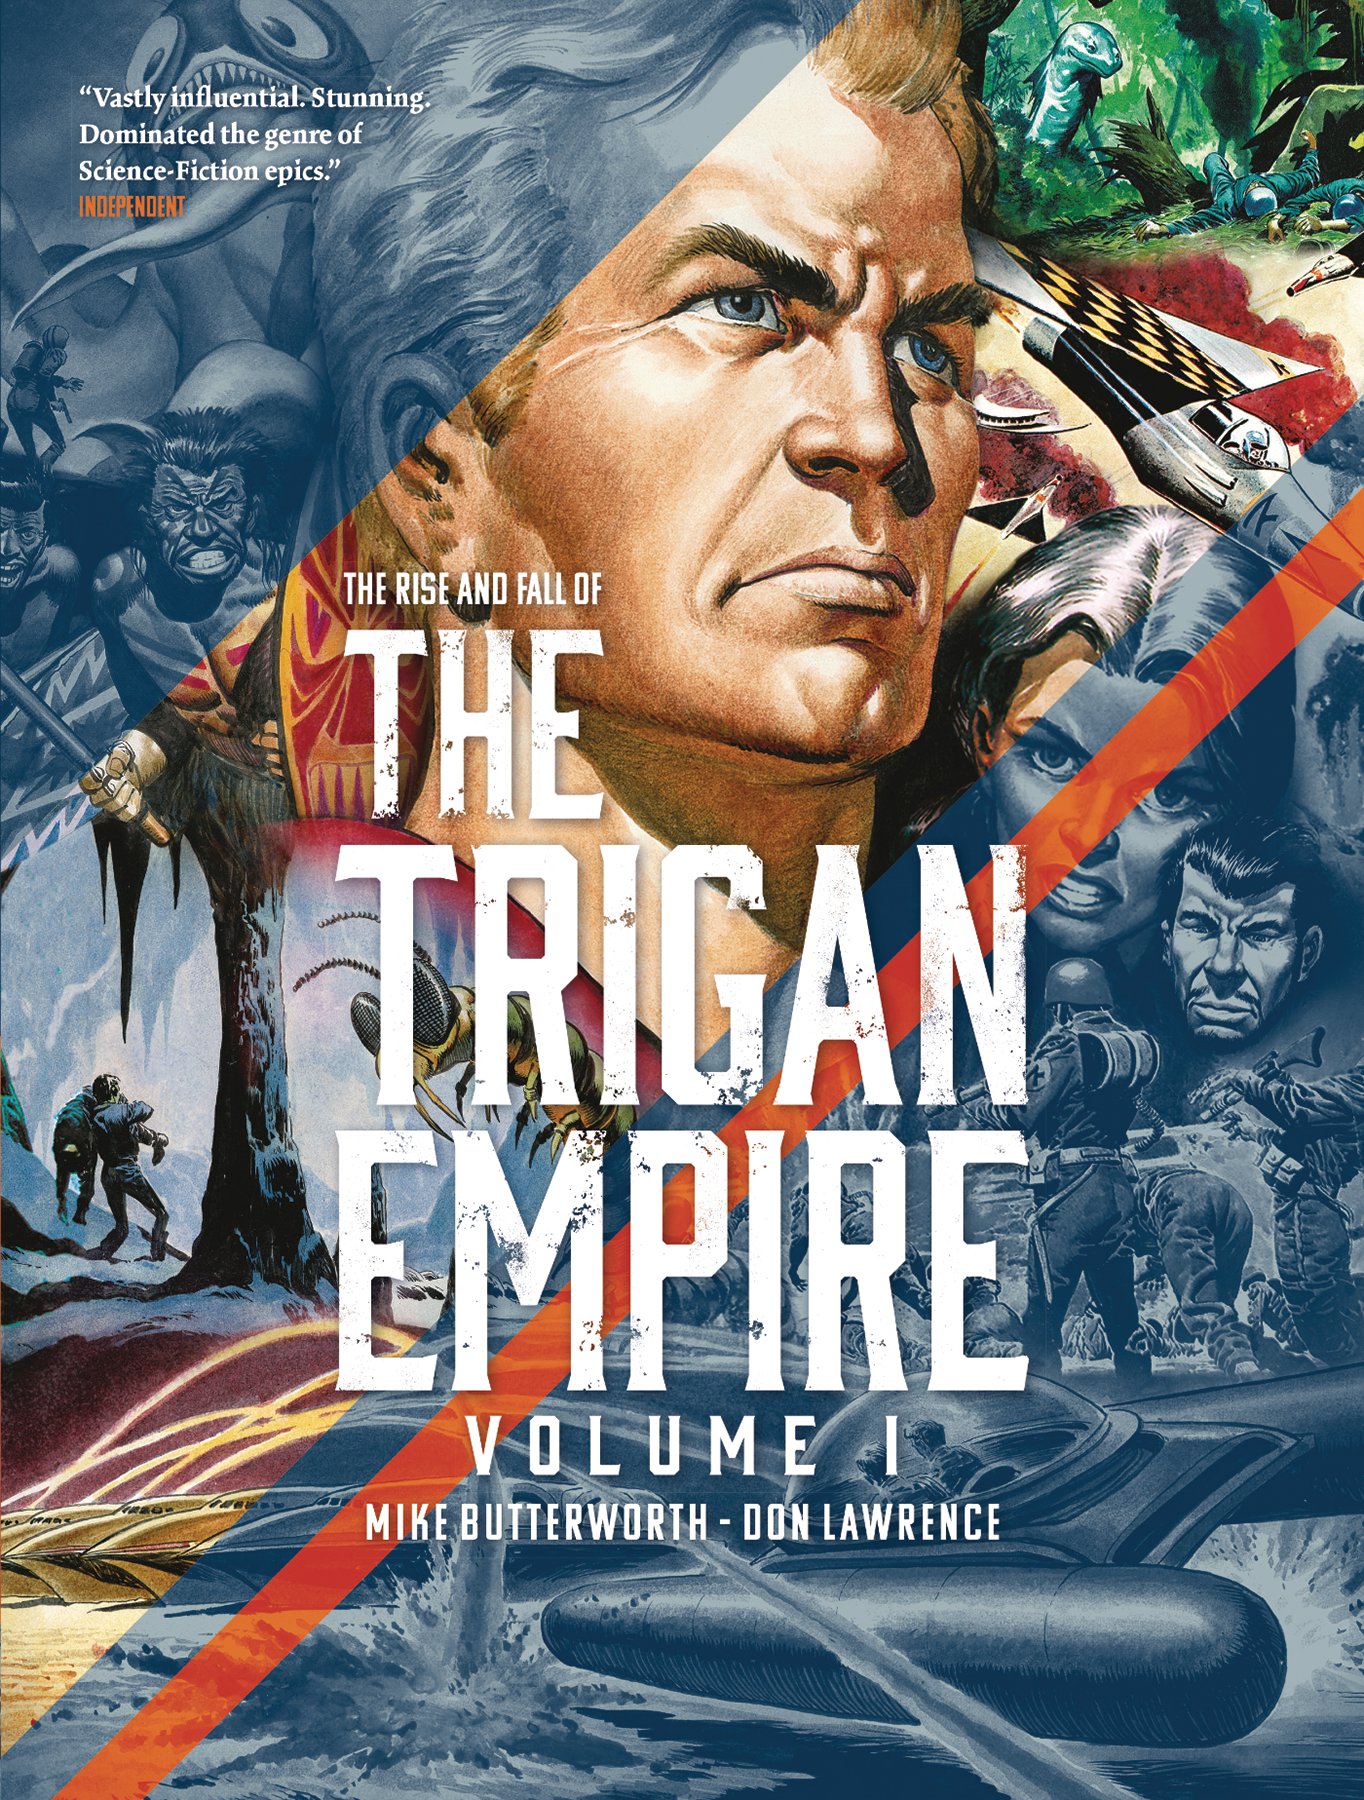 The Rise And Fall Of The Trigan Empire vol 1